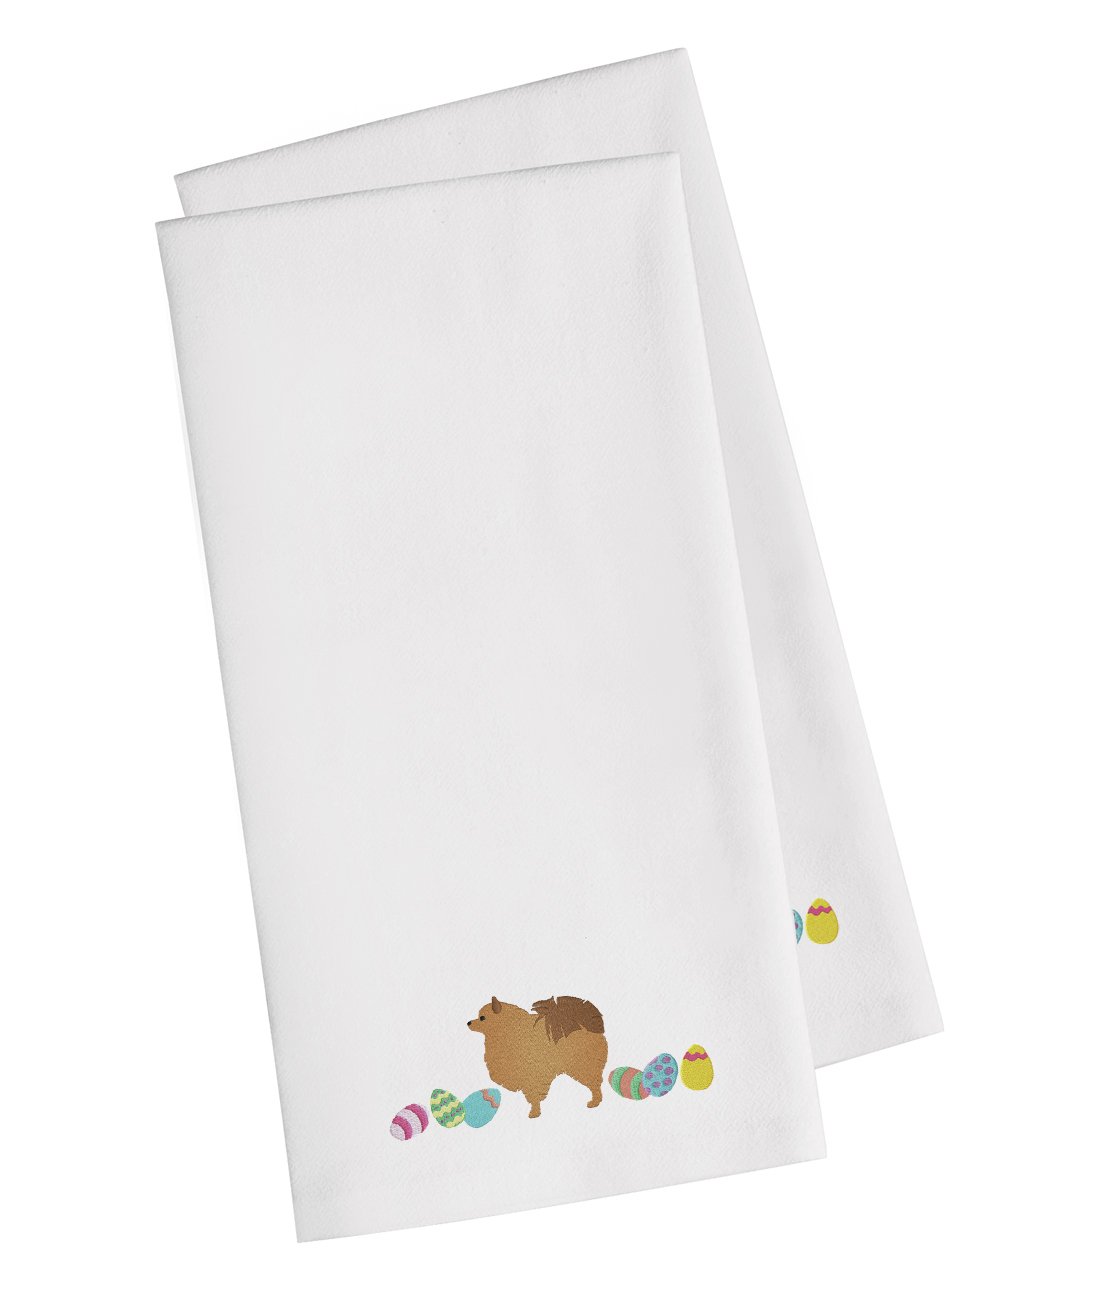 Pomeranian Easter White Embroidered Kitchen Towel Set of 2 CK1672WHTWE by Caroline's Treasures